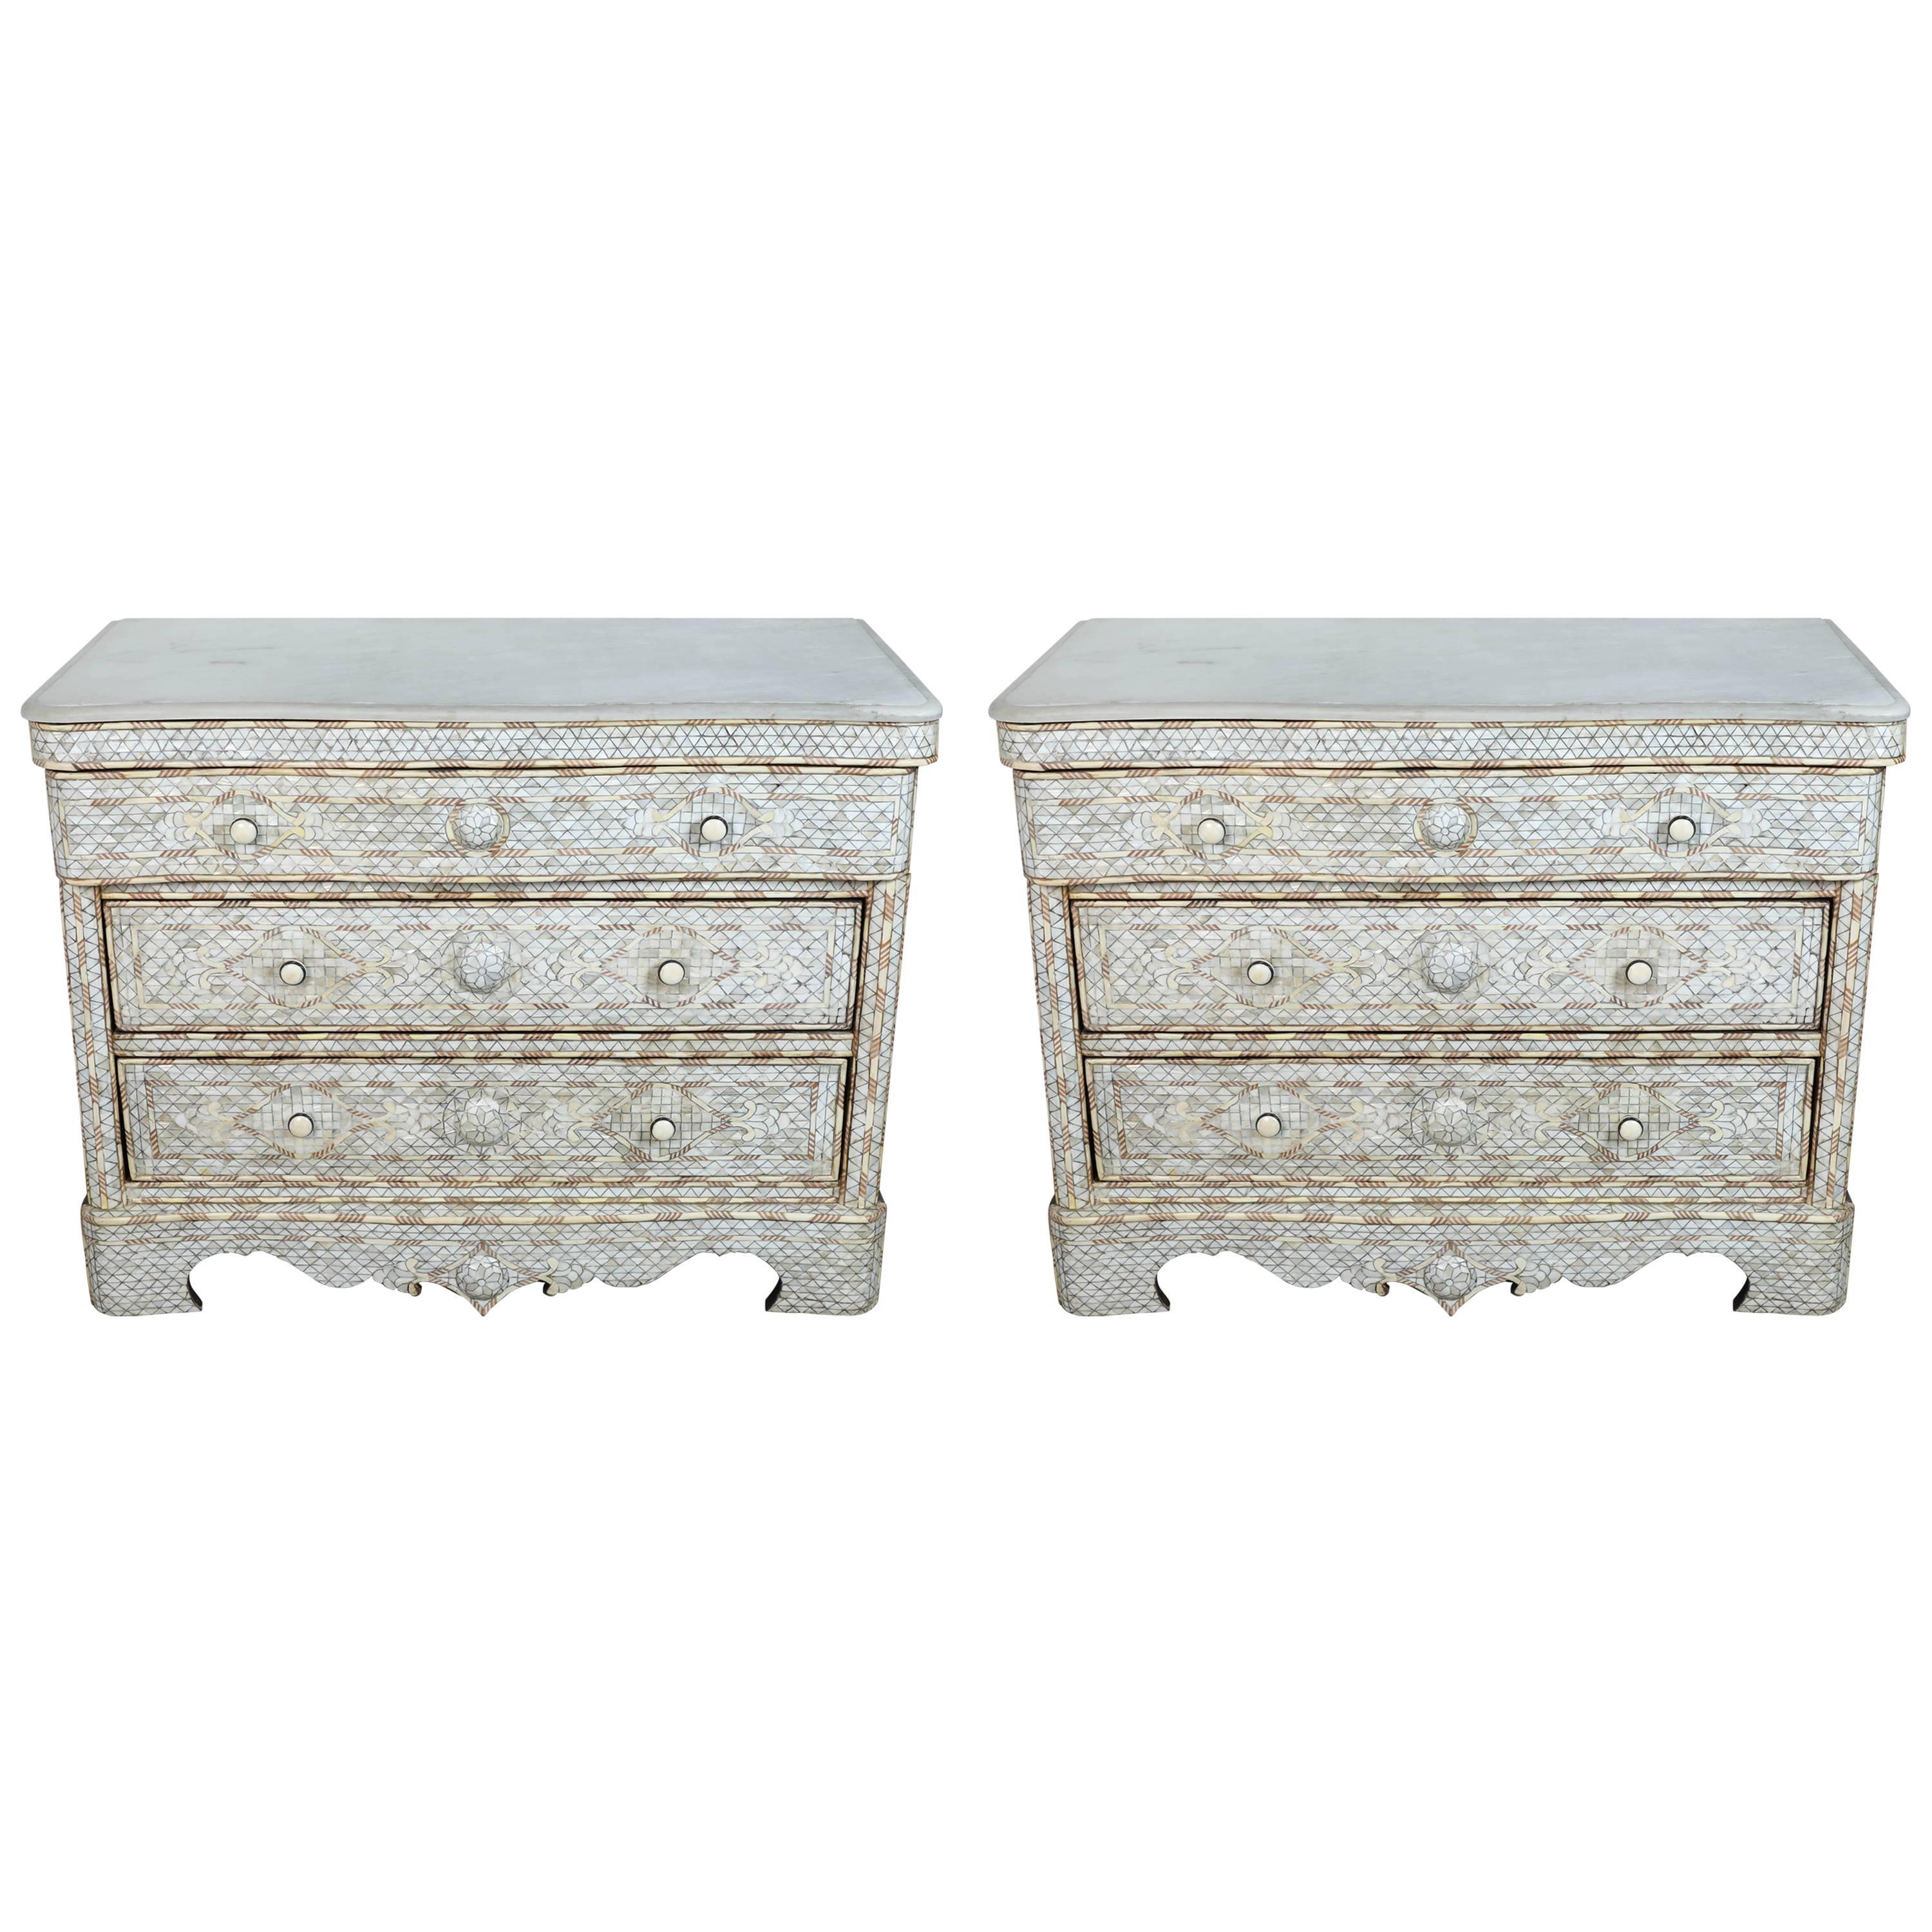 Pair of Syrian White Mother-of-Pearl Inlay Wedding Dressers